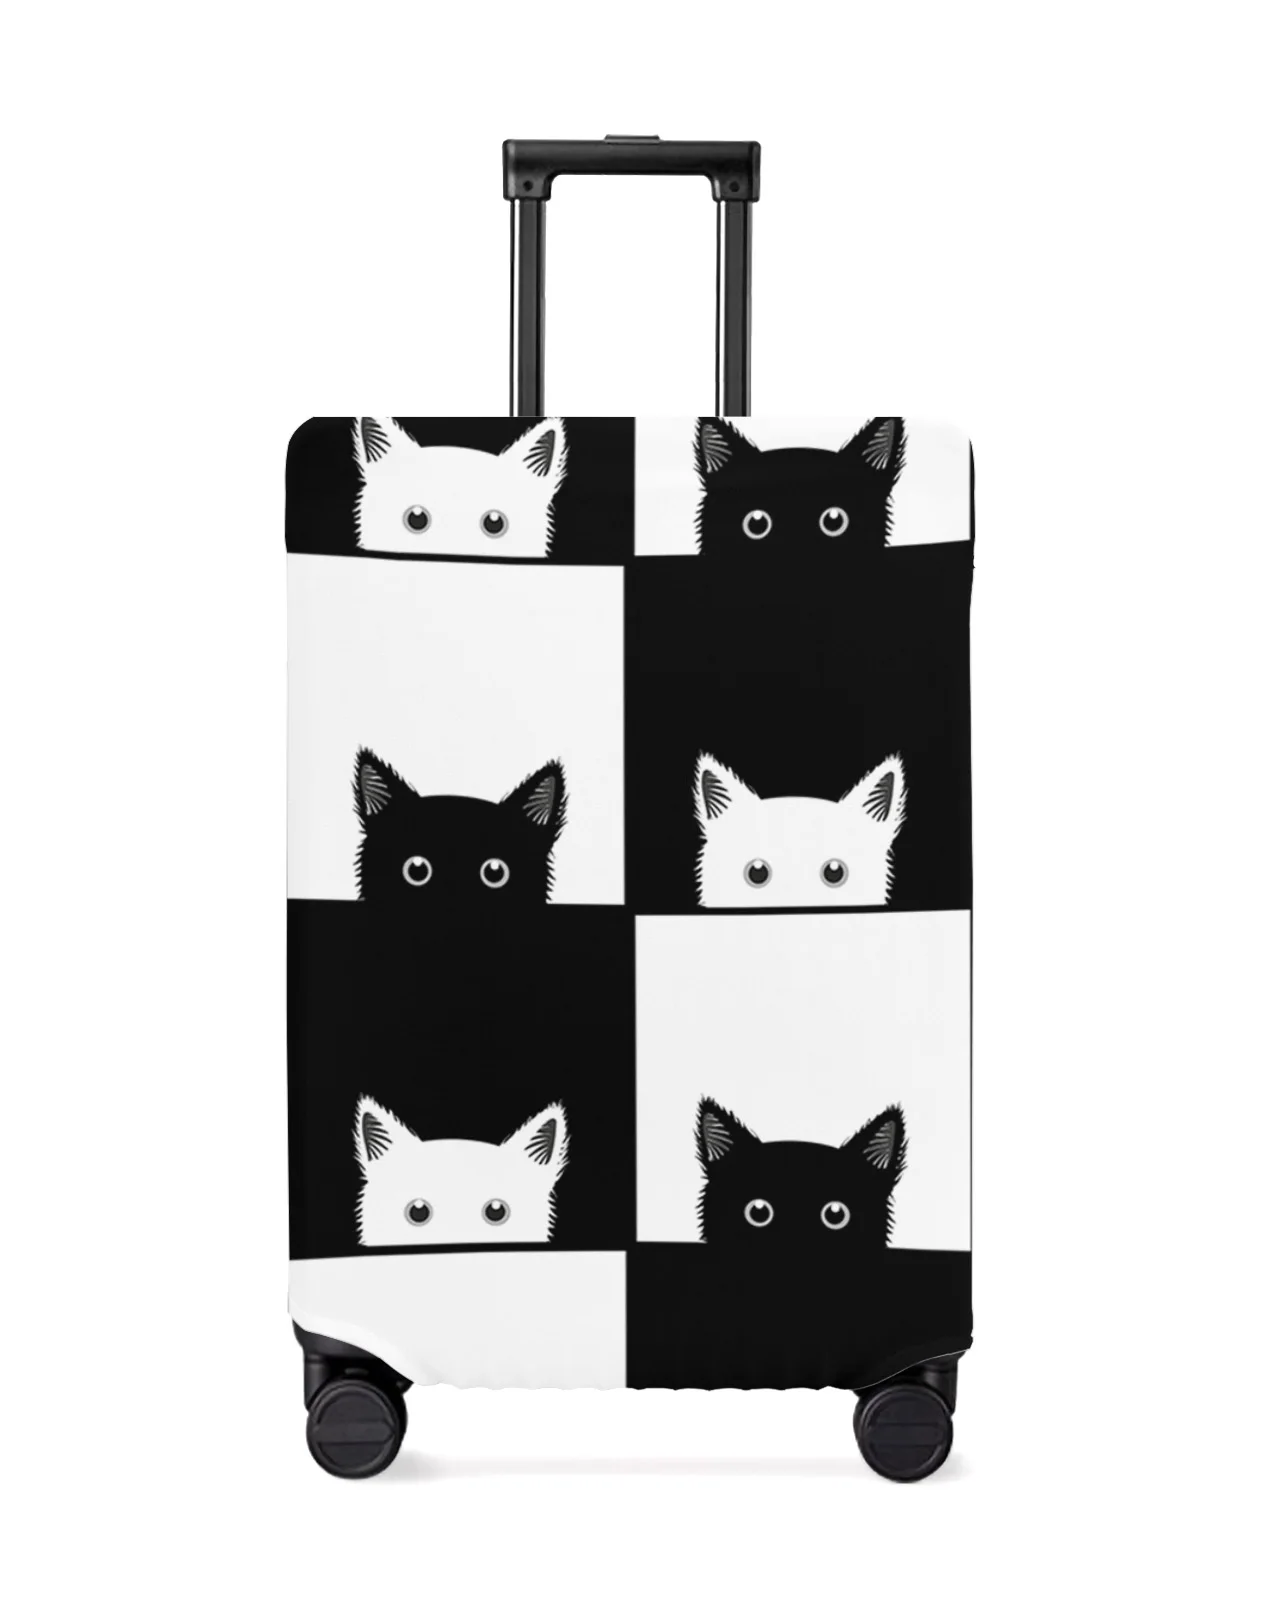 geometic-black-white-plaid-cat-travel-luggage-protective-cover-for-travel-accessories-suitcase-elastic-dust-case-protect-sleeve